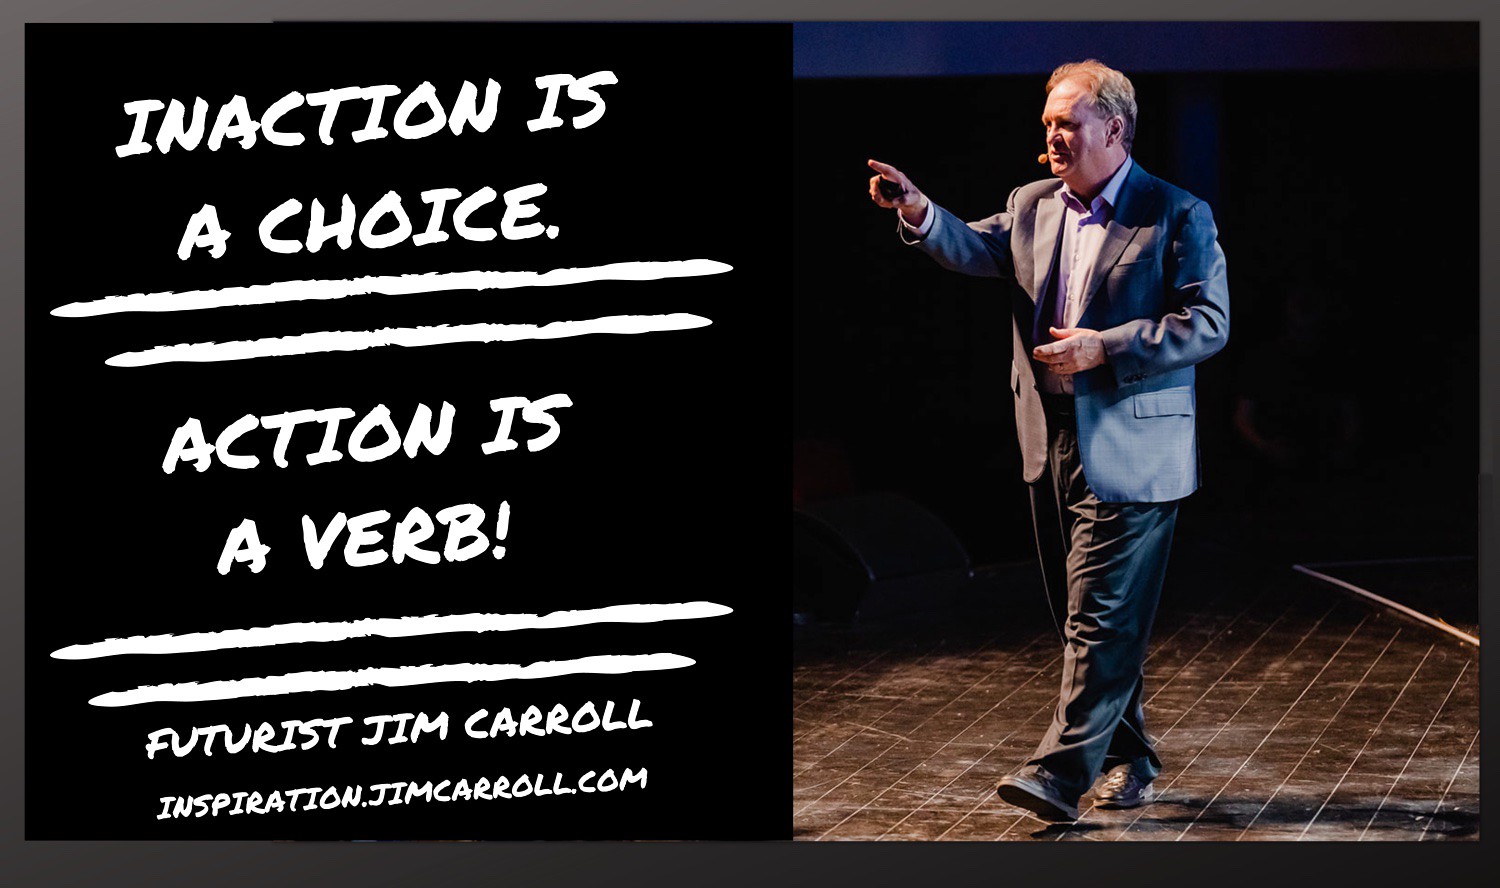 "Inaction is a choice. Action is a verb!" - Futurist Jim Carroll